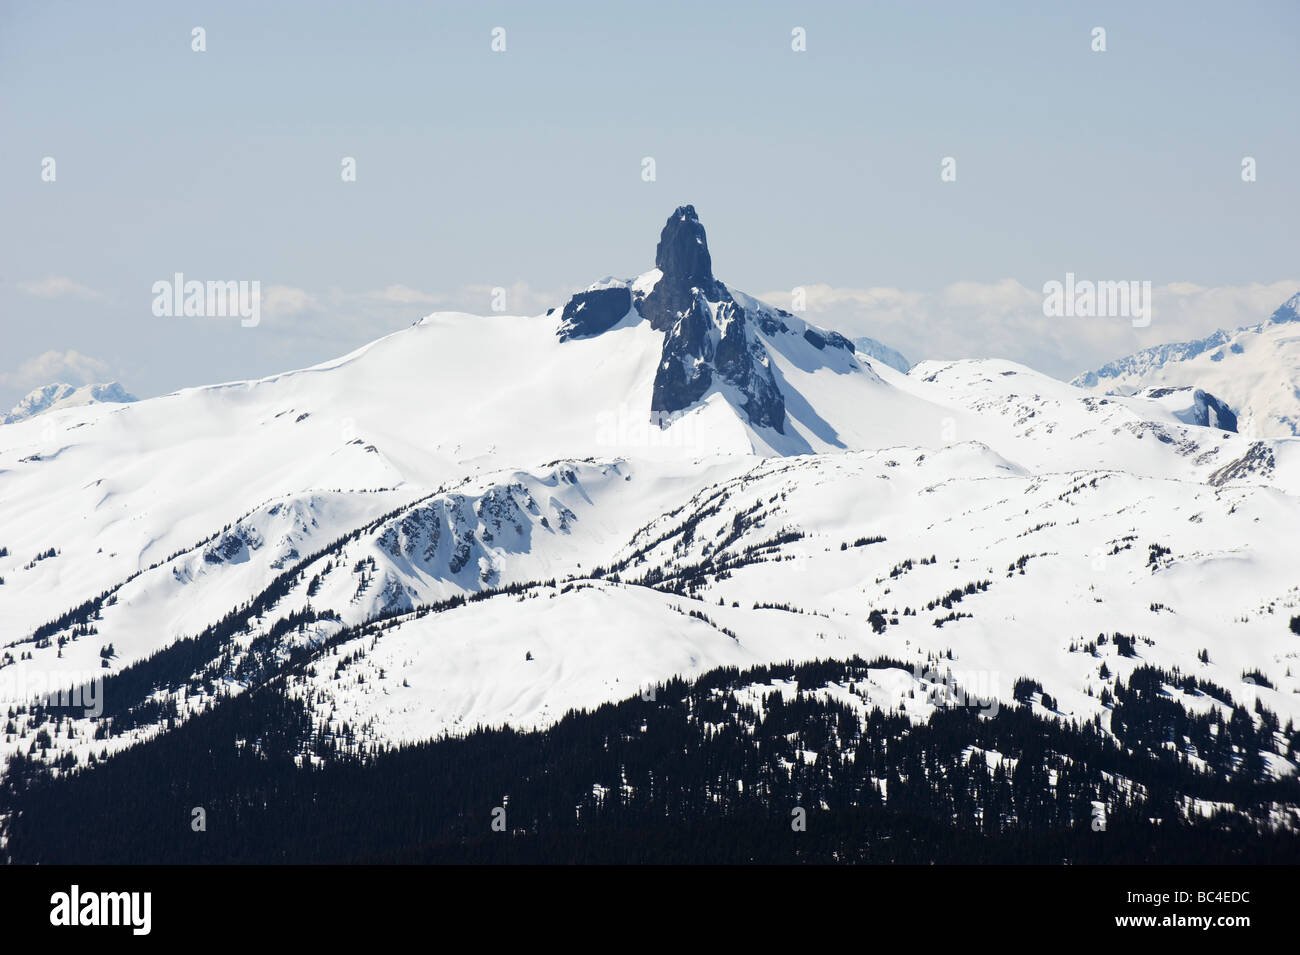 Black Tusk seen from Whistler Peak mountain resort venue of the 2010 Winter Olympic Games Stock Photo